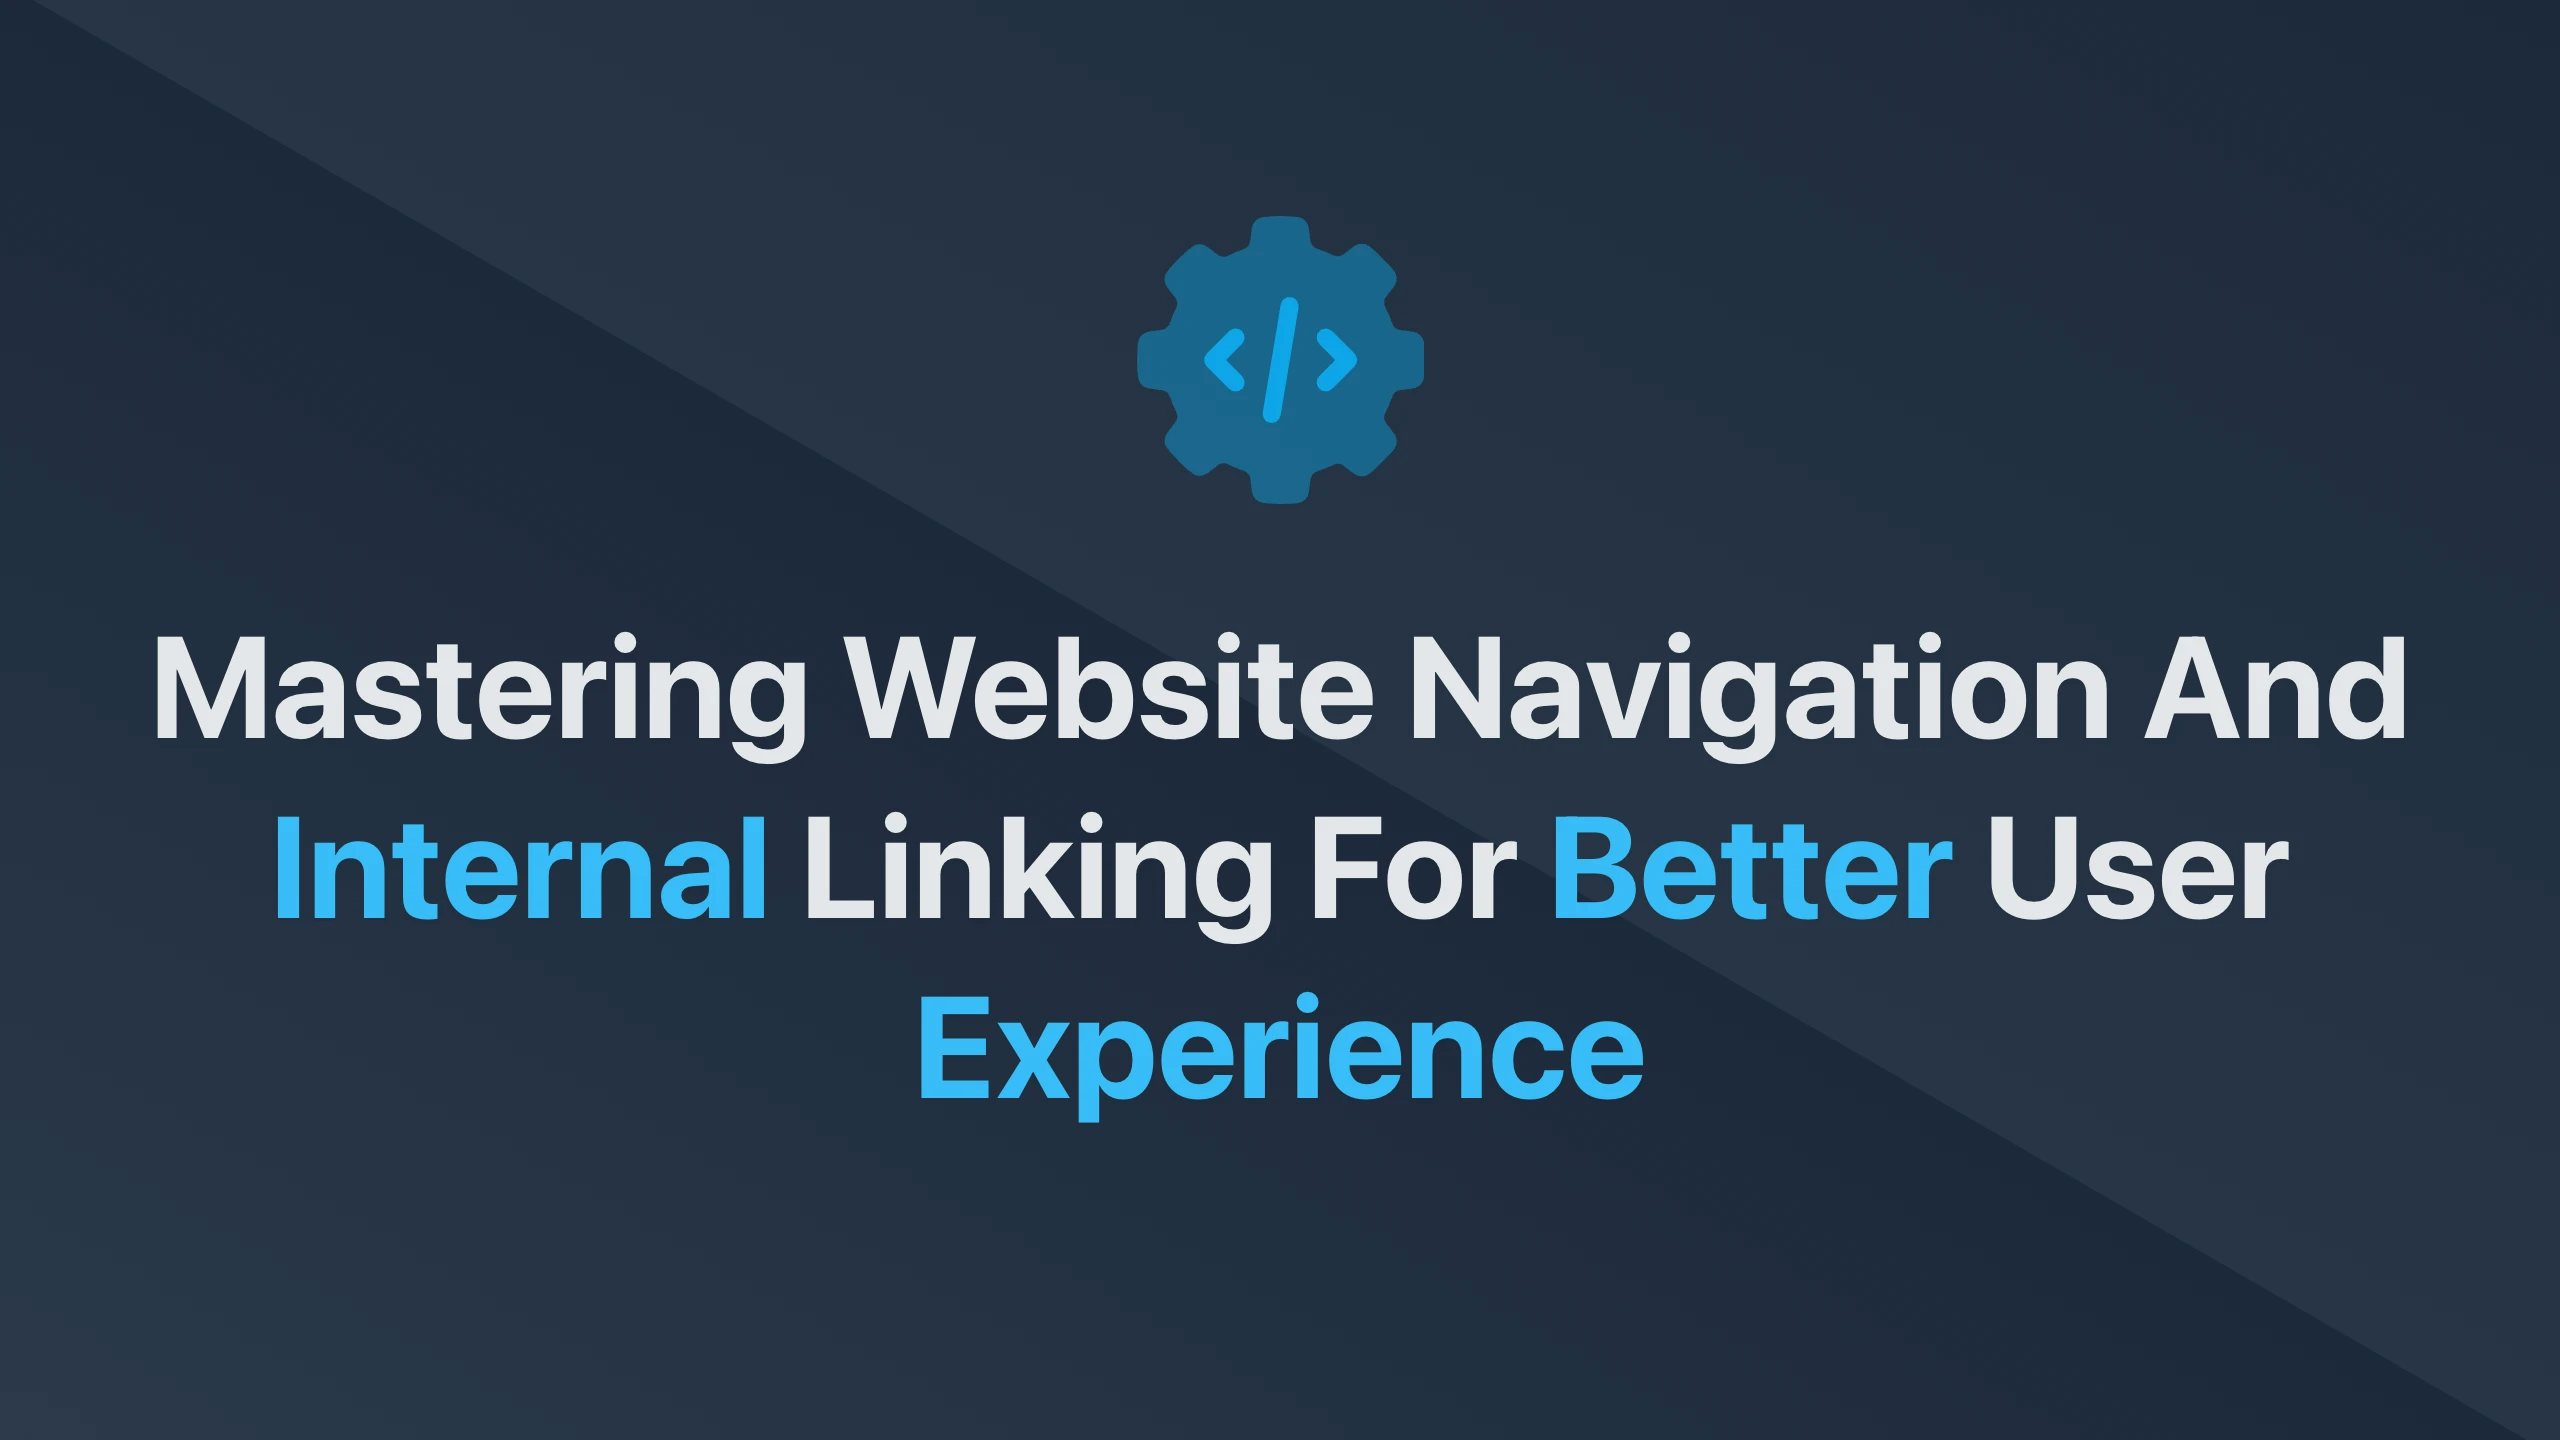 Cover Image for Mastering Website Navigation and Internal Linking for Better User Experience